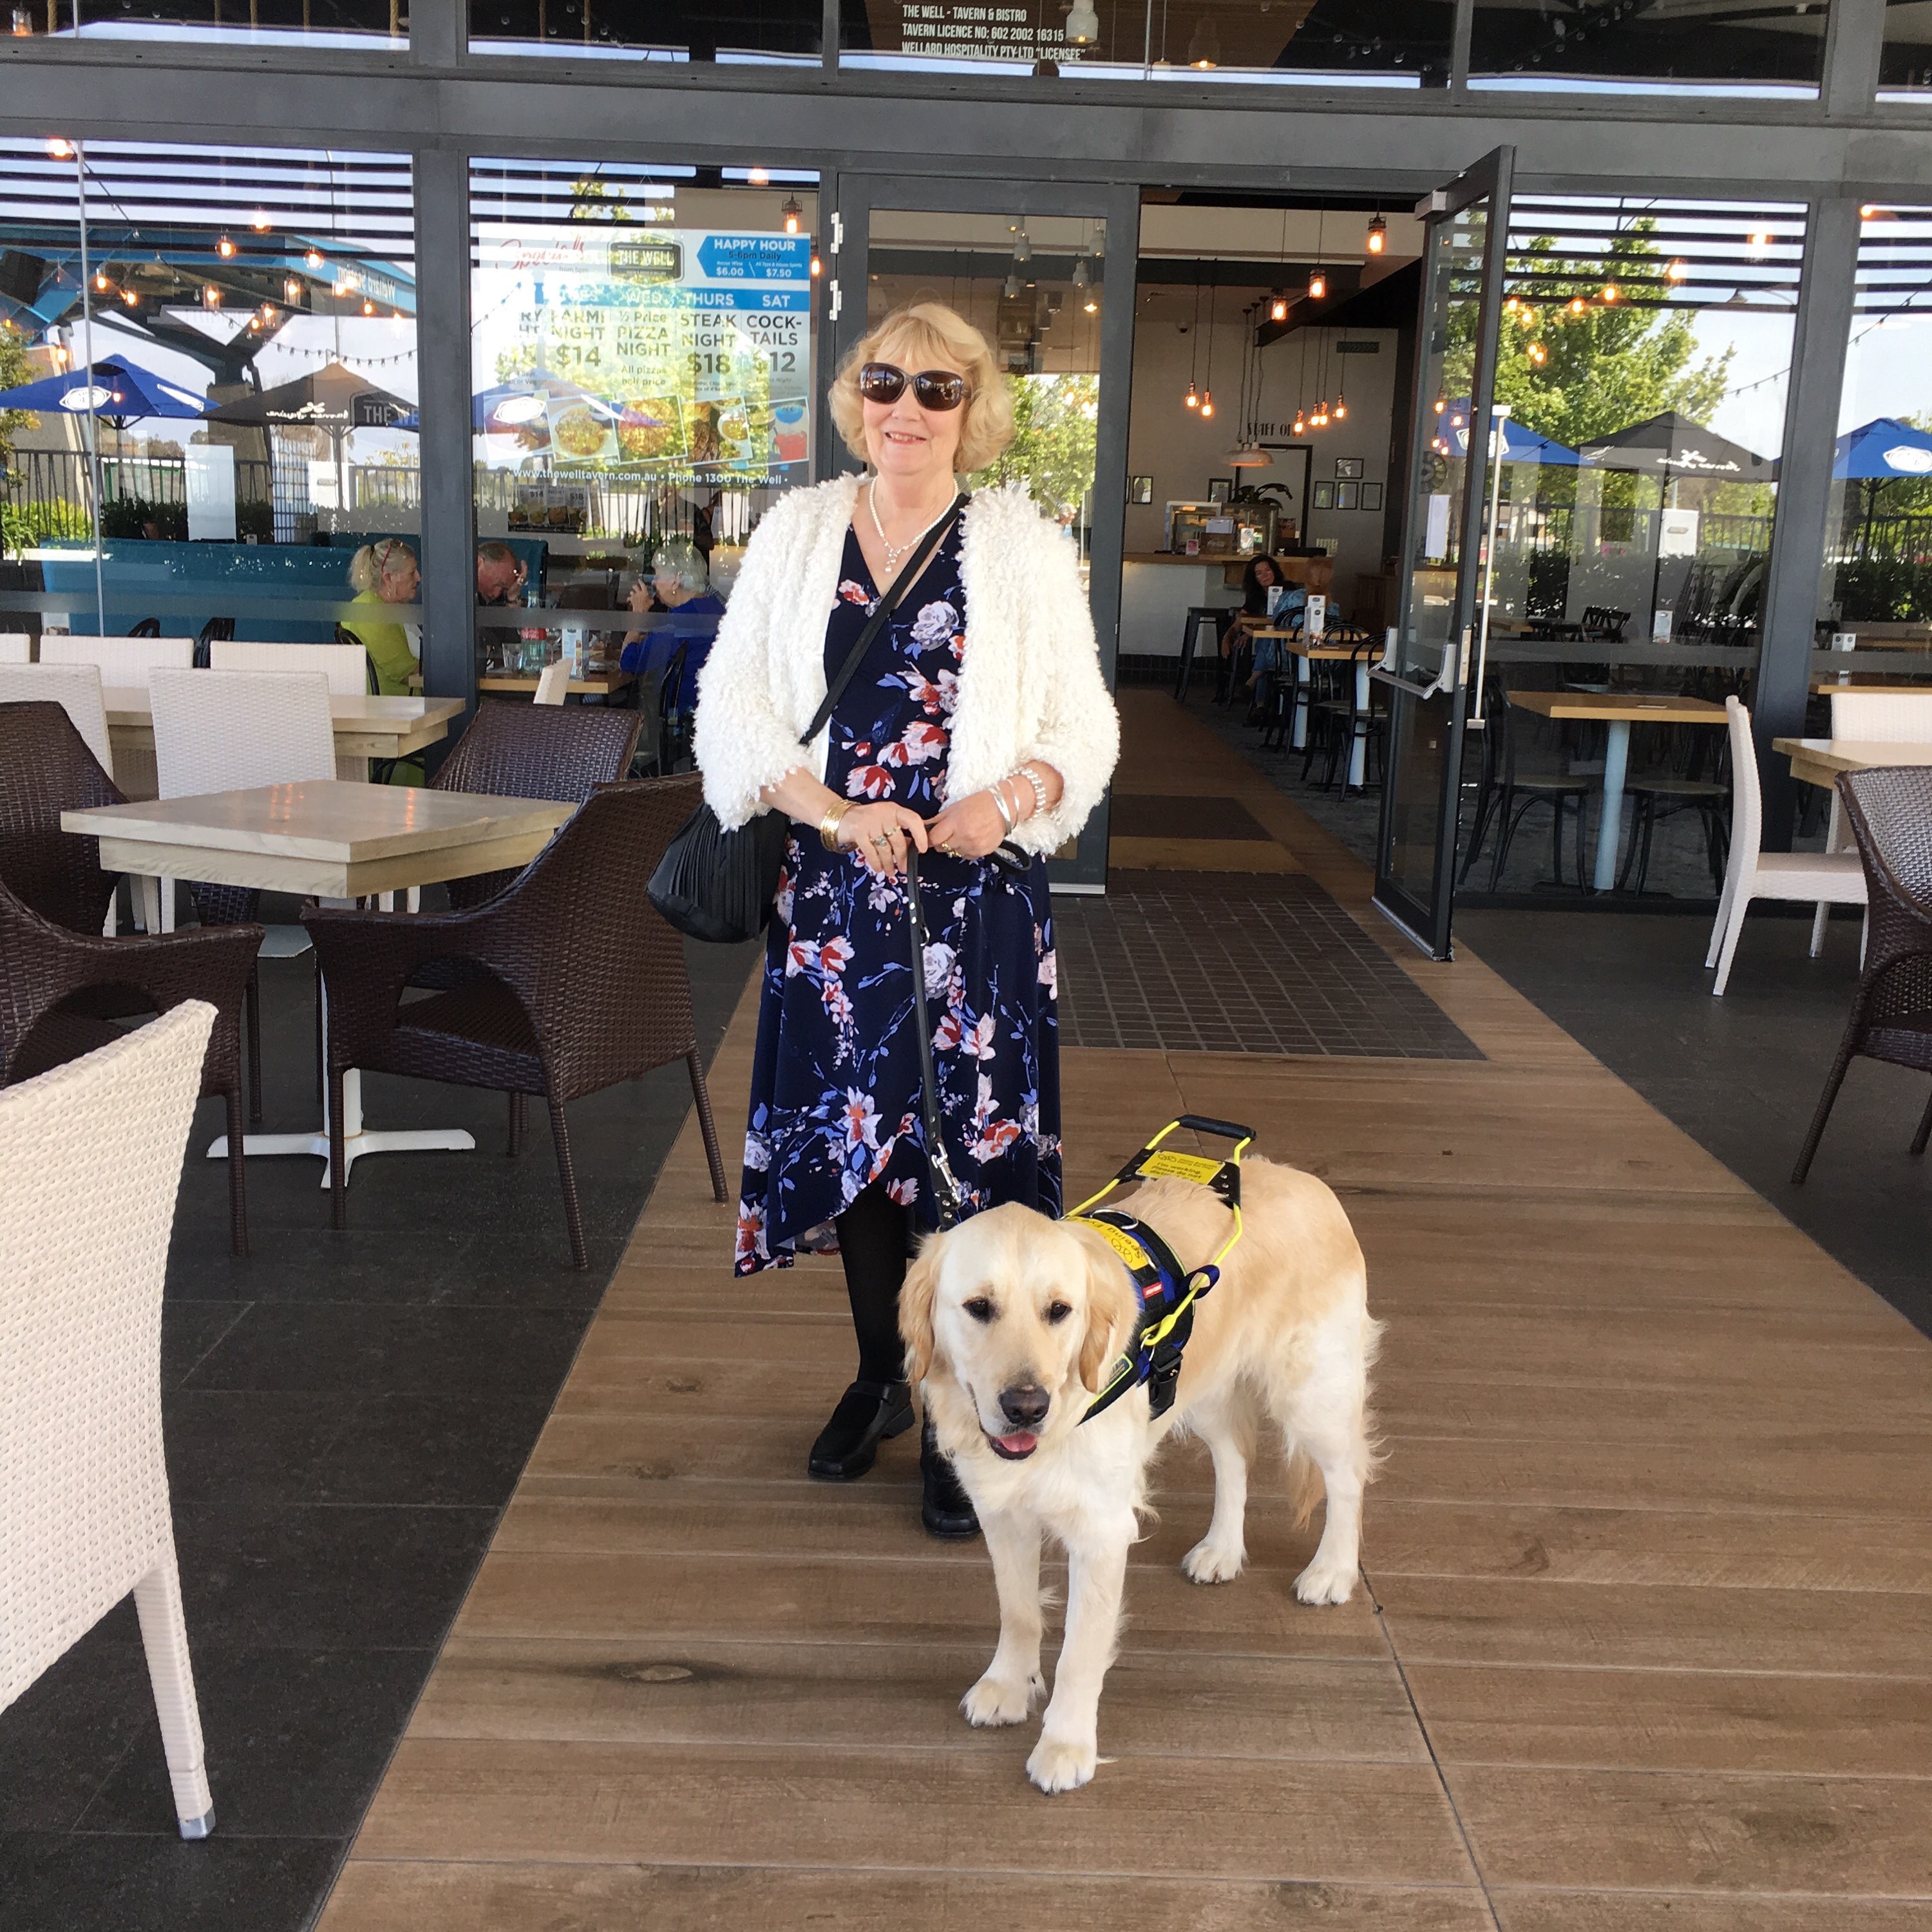 Therese stands with Seeing Eye Dog Yael outside a cafe.